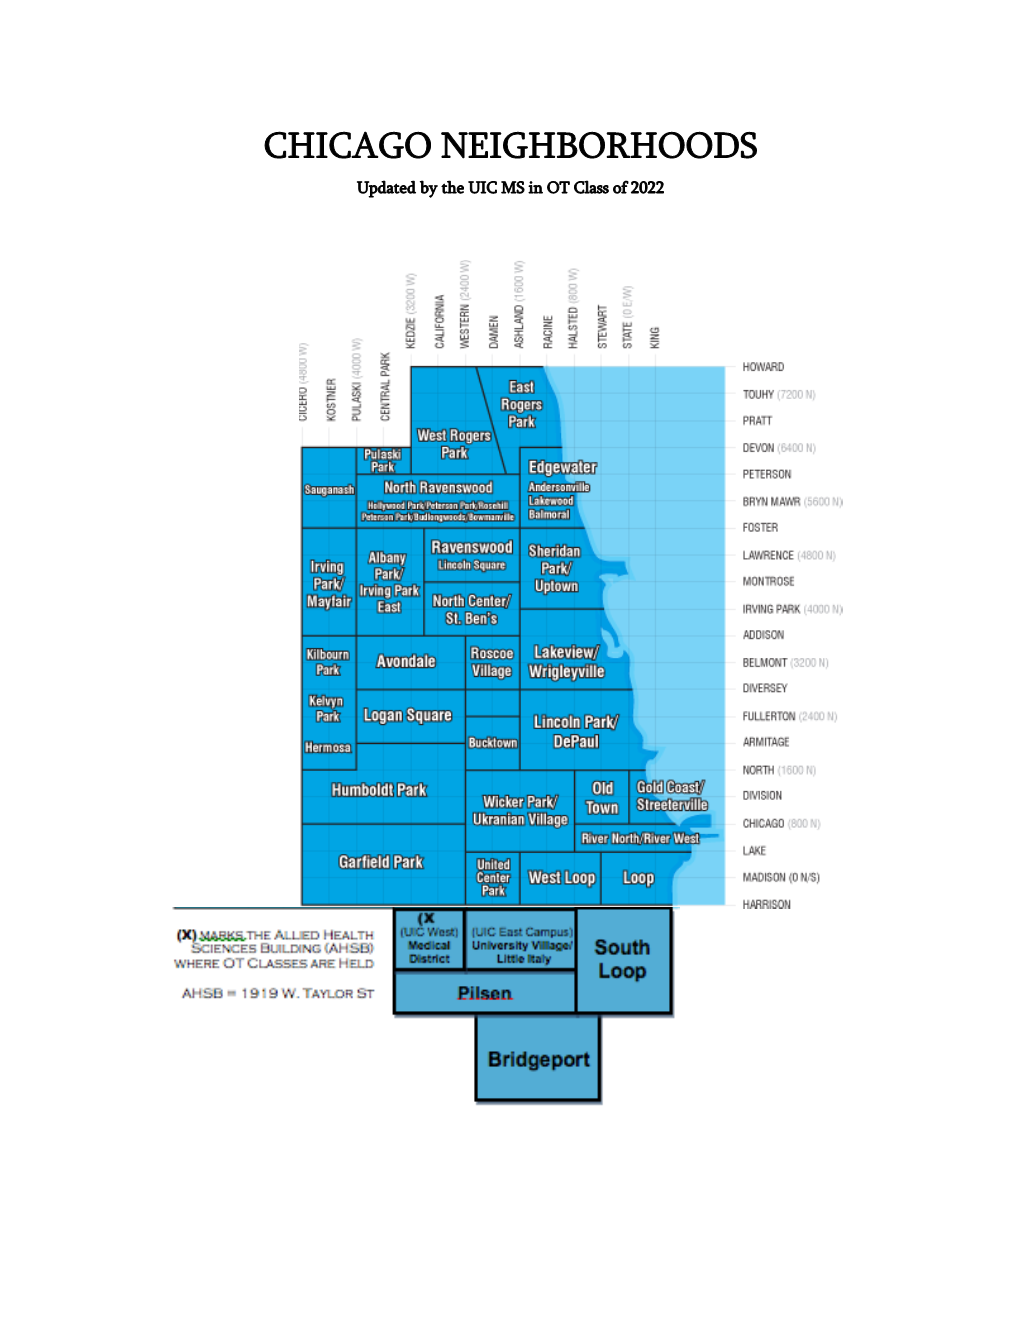 CHICAGO NEIGHBORHOODS Updated by the UIC MS in OT Class of 2022